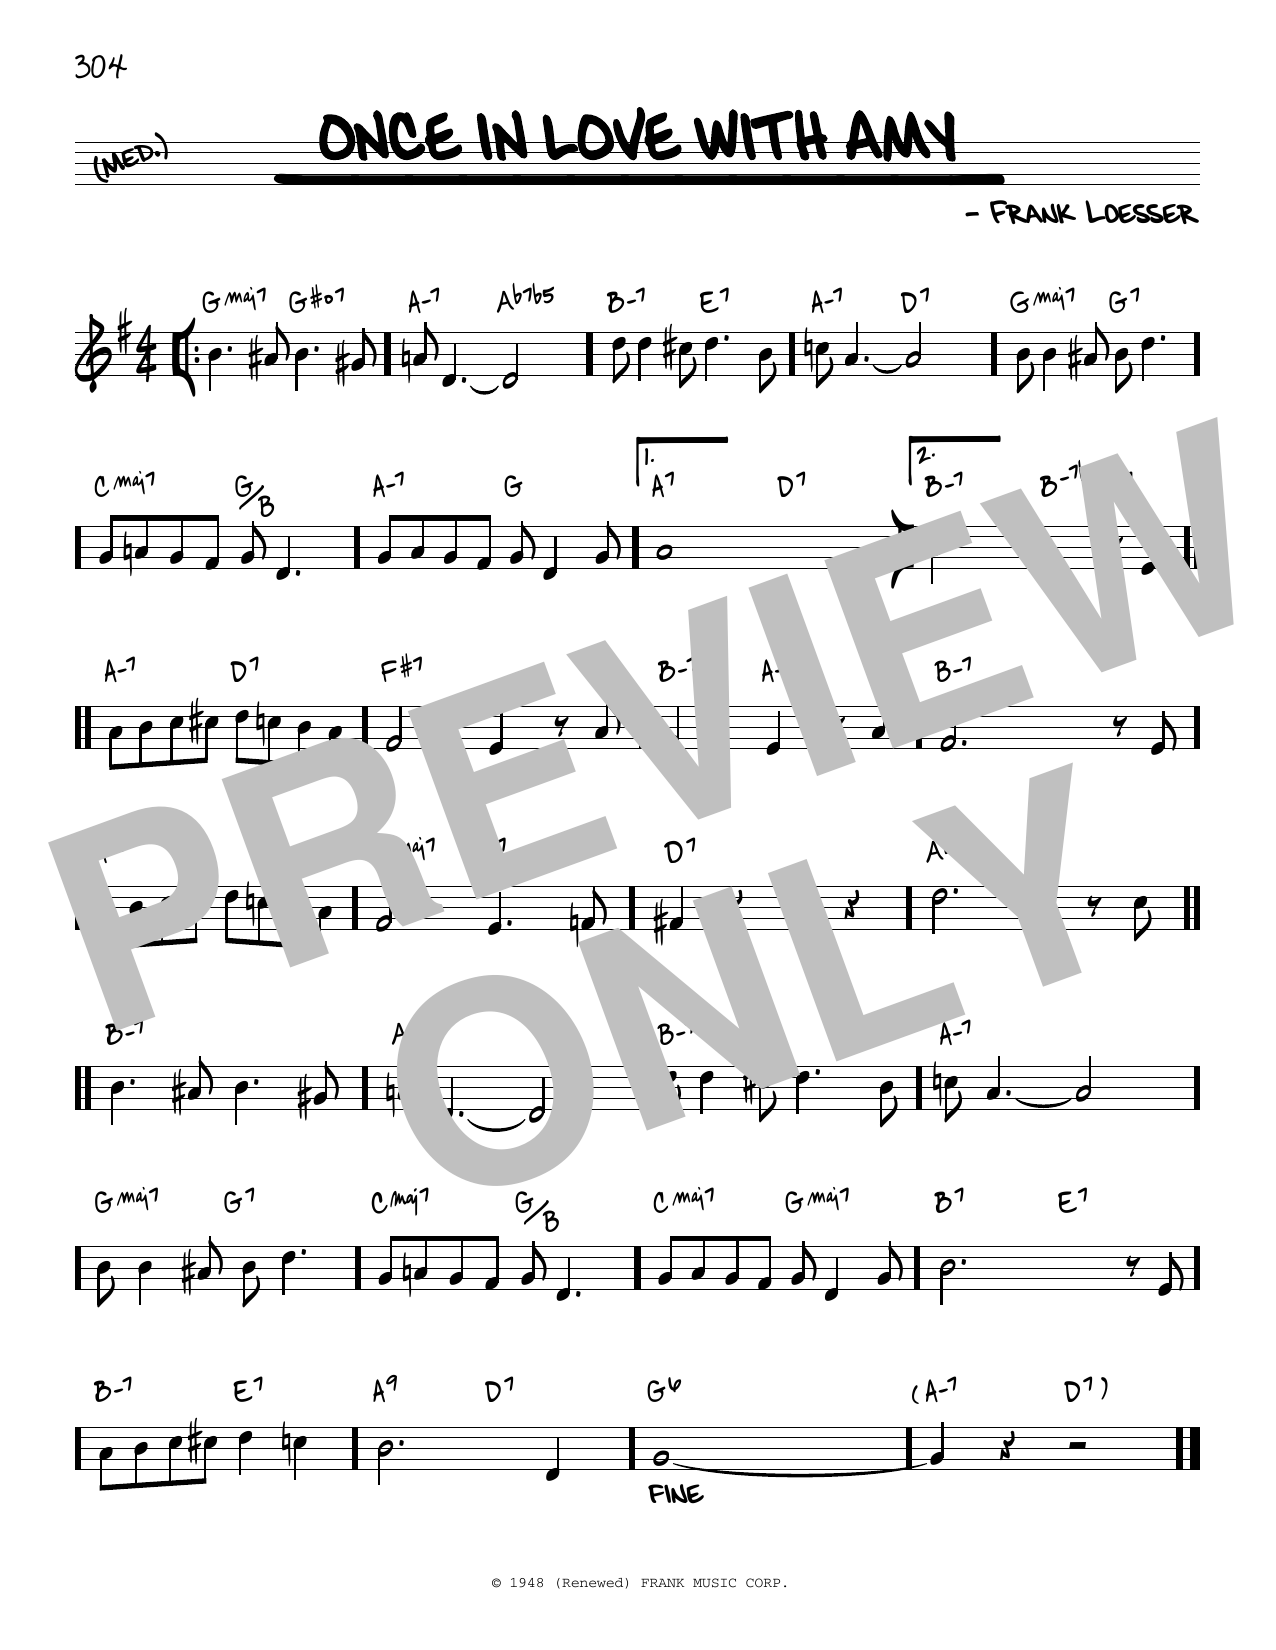 Download Frank Loesser Once In Love With Amy [Reharmonized ver Sheet Music